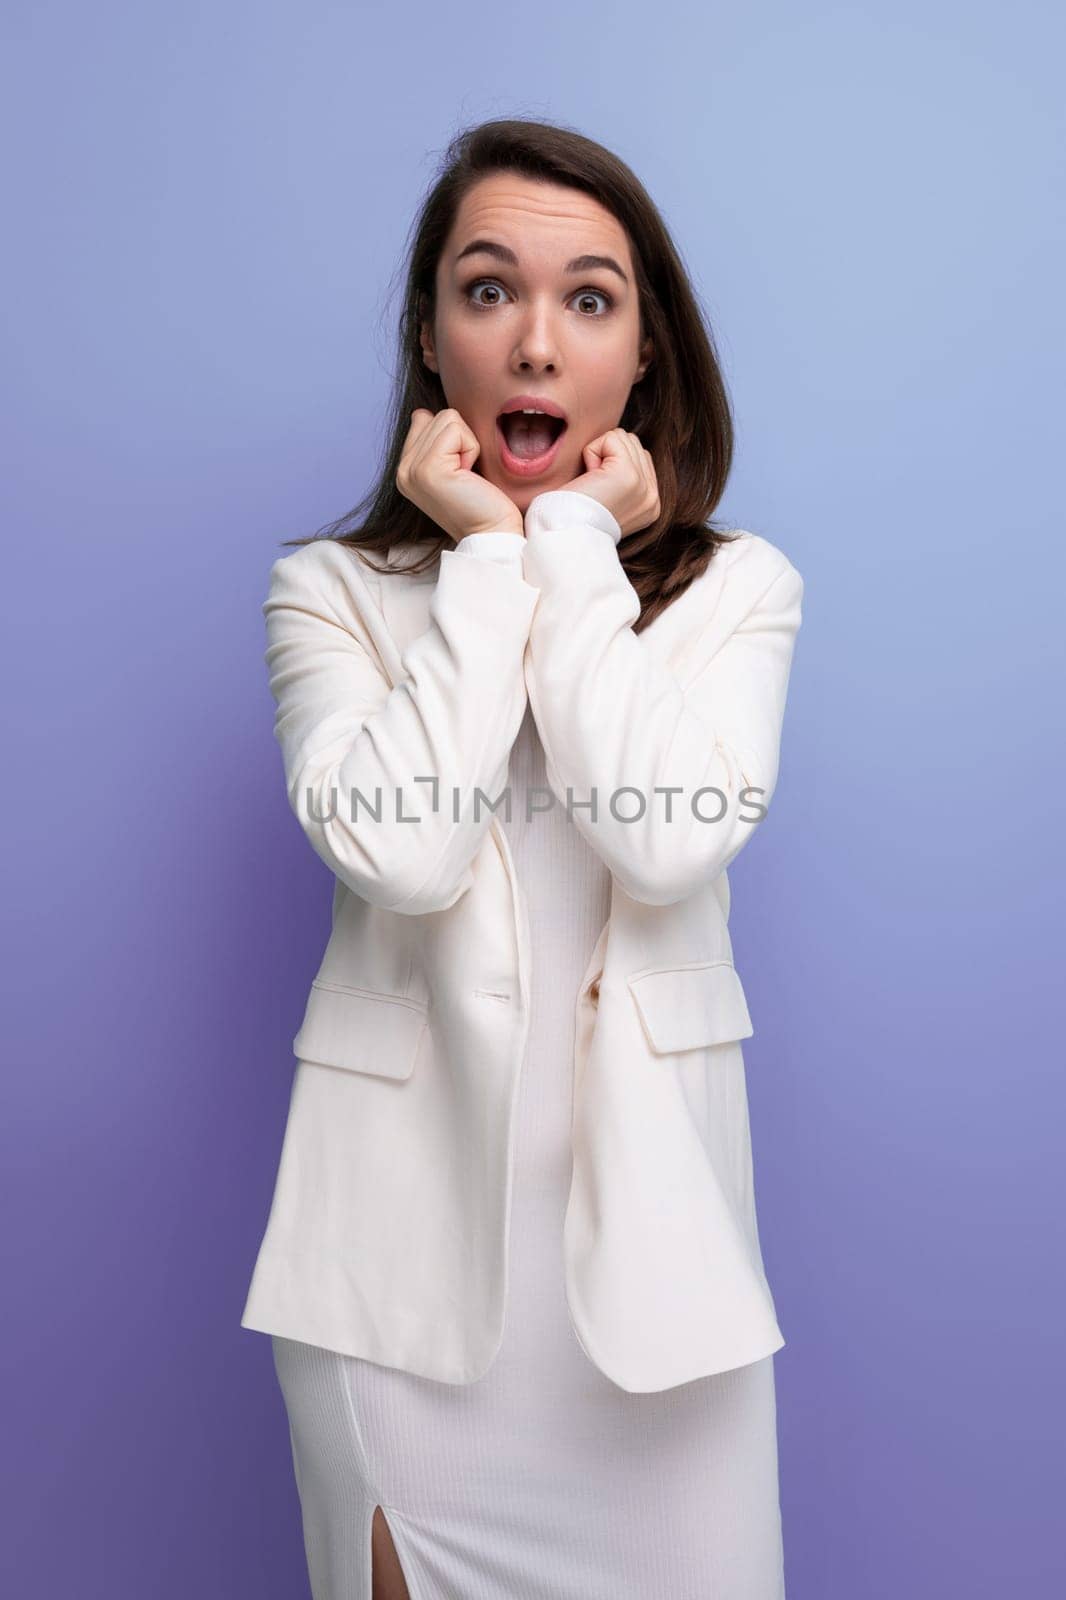 upset sad brunette young woman in a dress and jacket with a grimace.